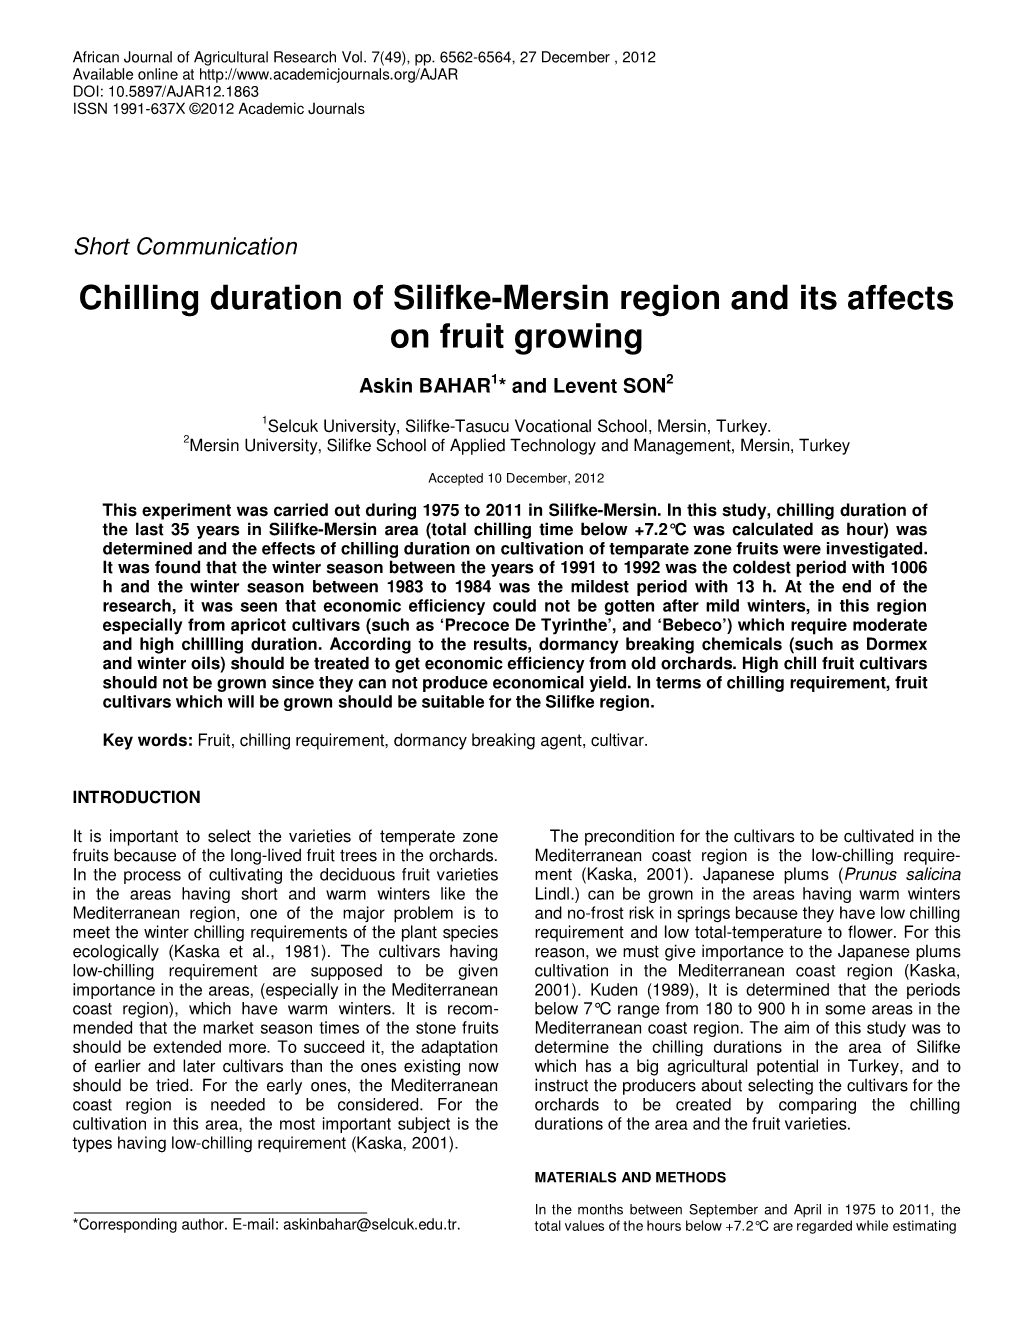 Chilling Duration of Silifke-Mersin Region and Its Affects on Fruit Growing